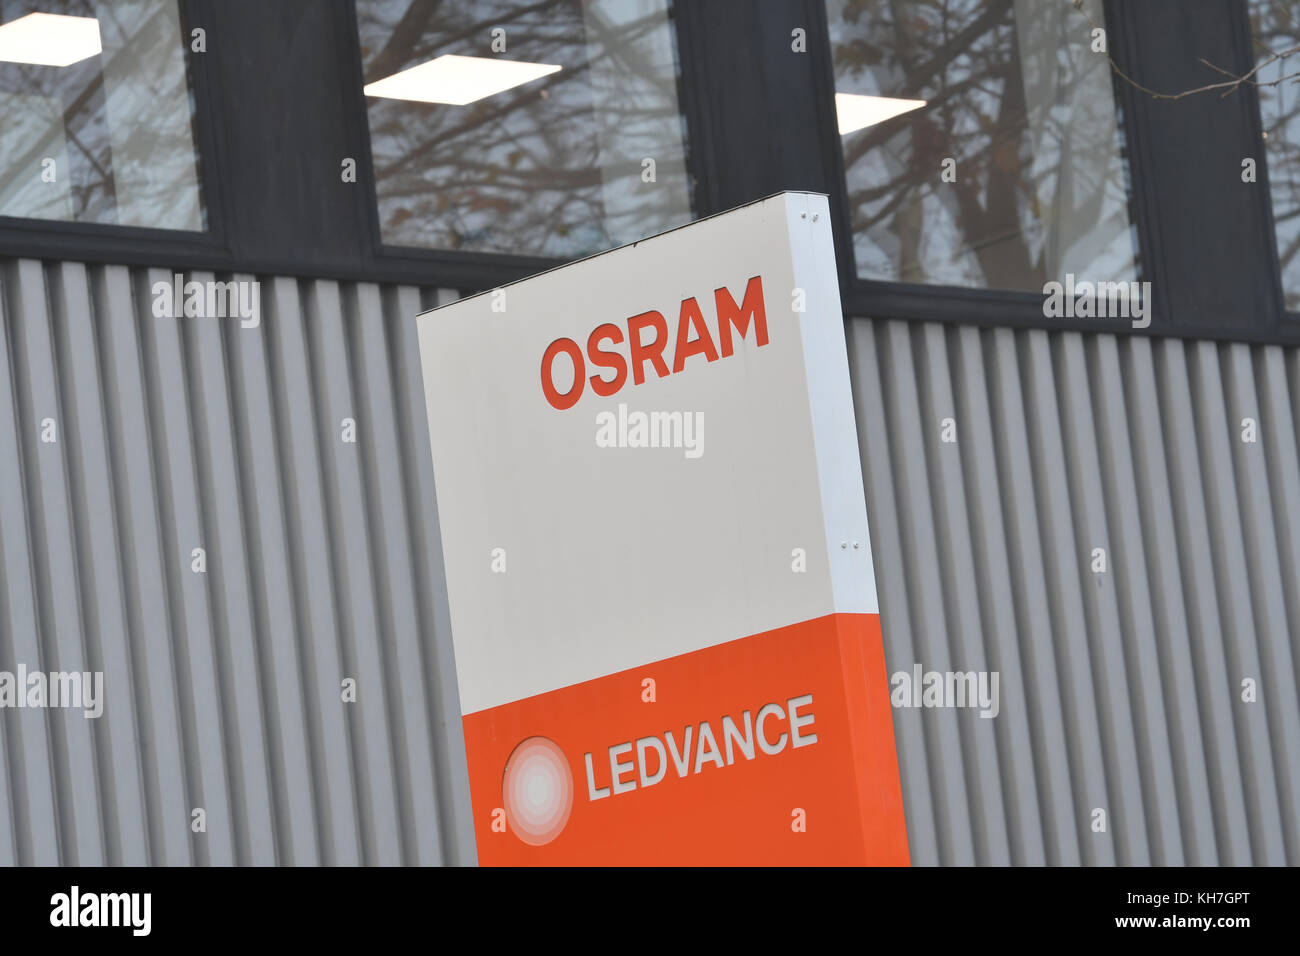 The logos "Osram" and "Ledvance" can be read on a board at the plant in  Nonnendammallee, Berlin, Germany, 14 November 2017. The illuminant producer  Ledvance is set to close down its plants